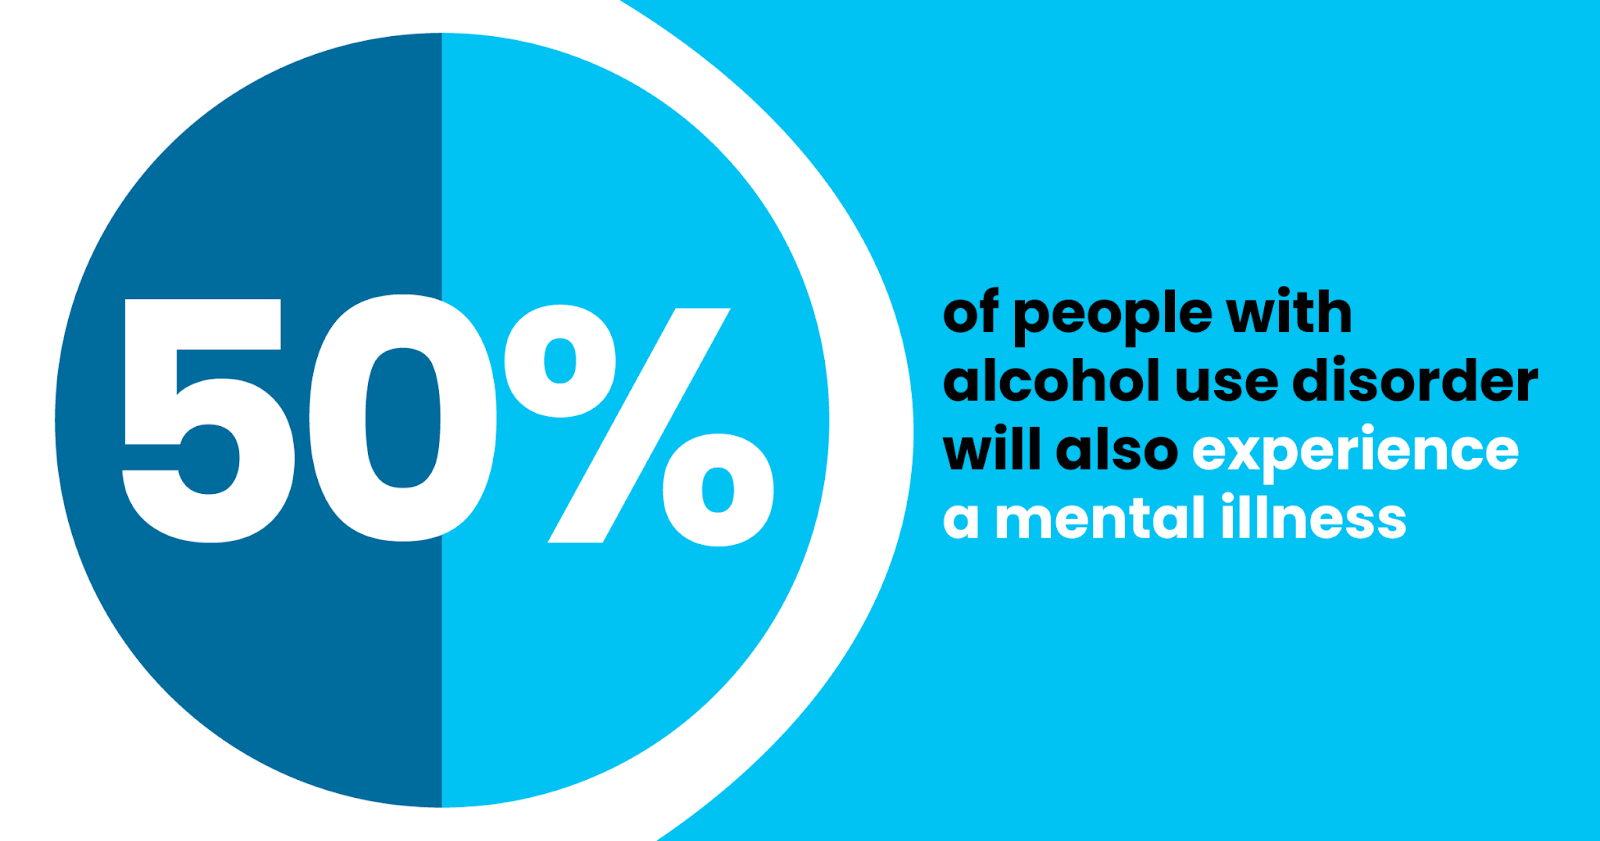 50%of people with alcohol use disorder also experience mental illness